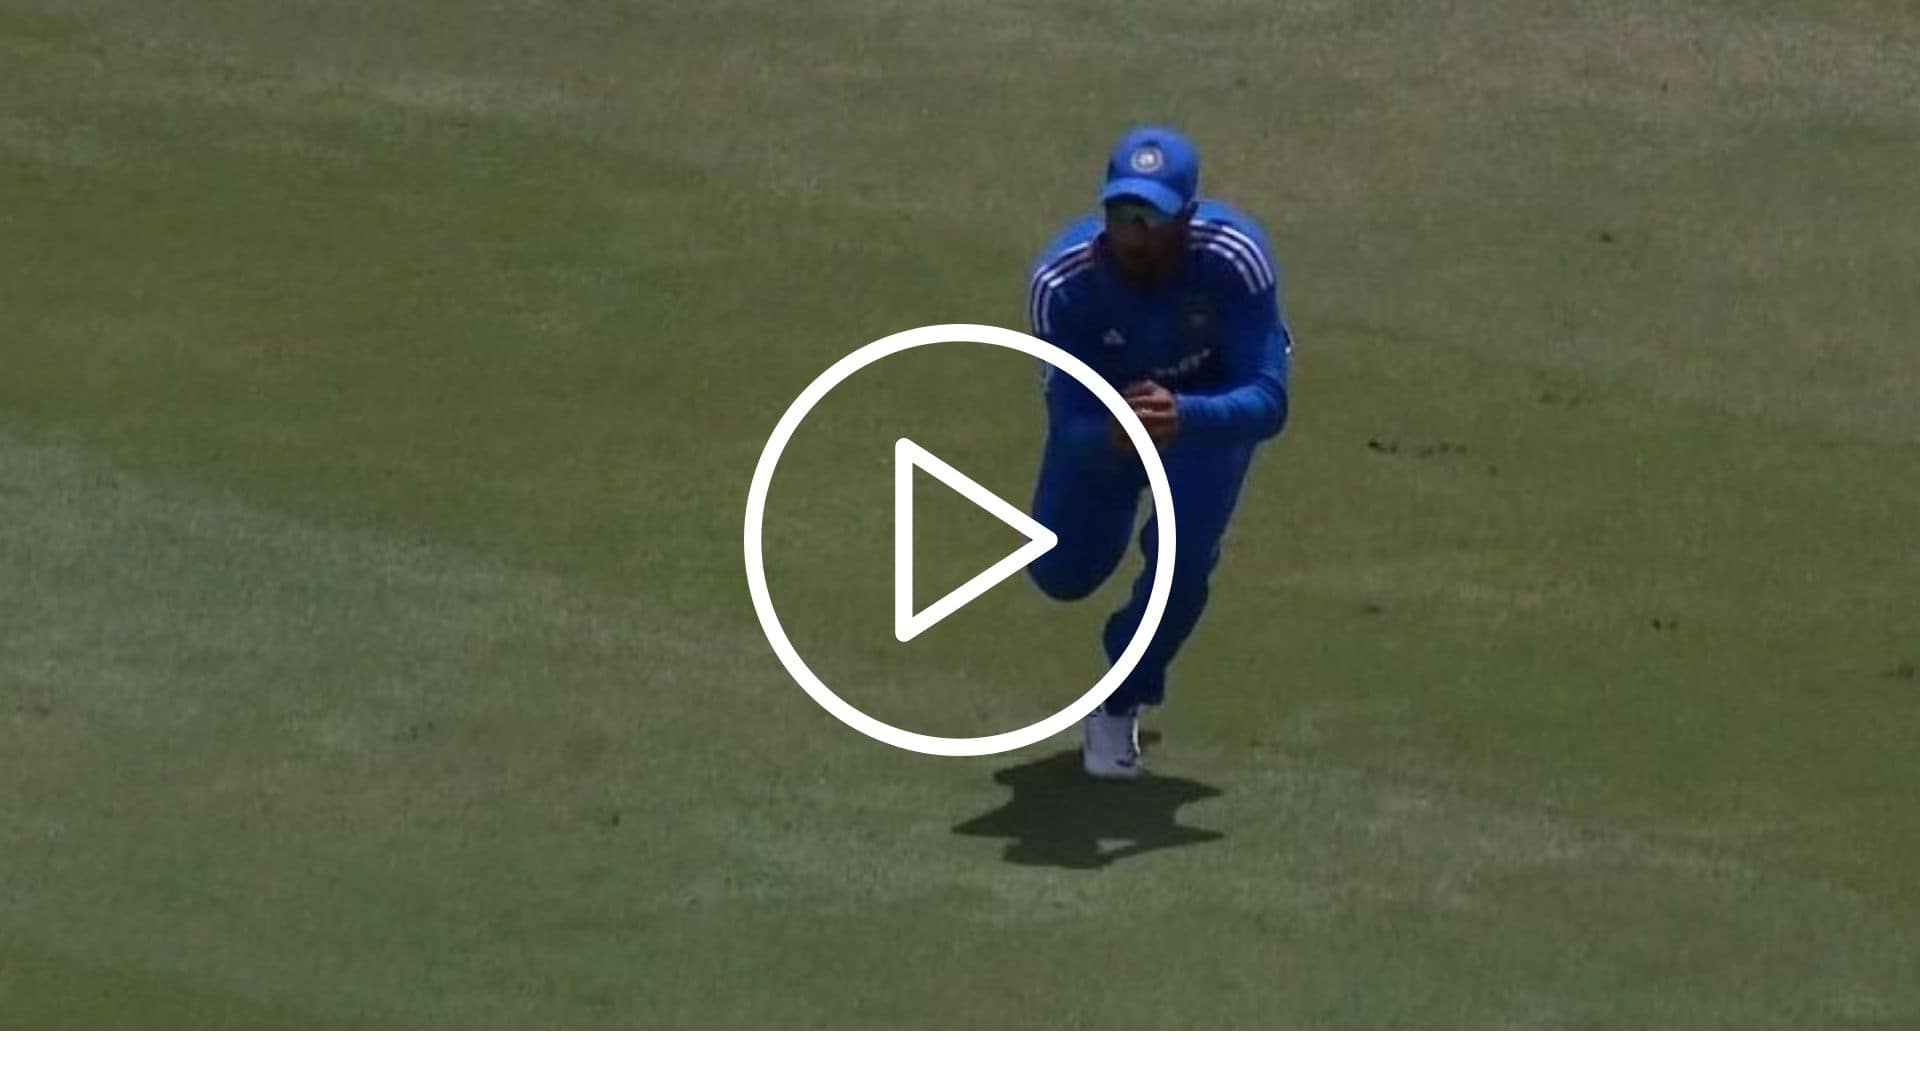 [Watch] Tilak Varma Pulls Off A Stunning Running Catch To Shock Johnson Charles And Company